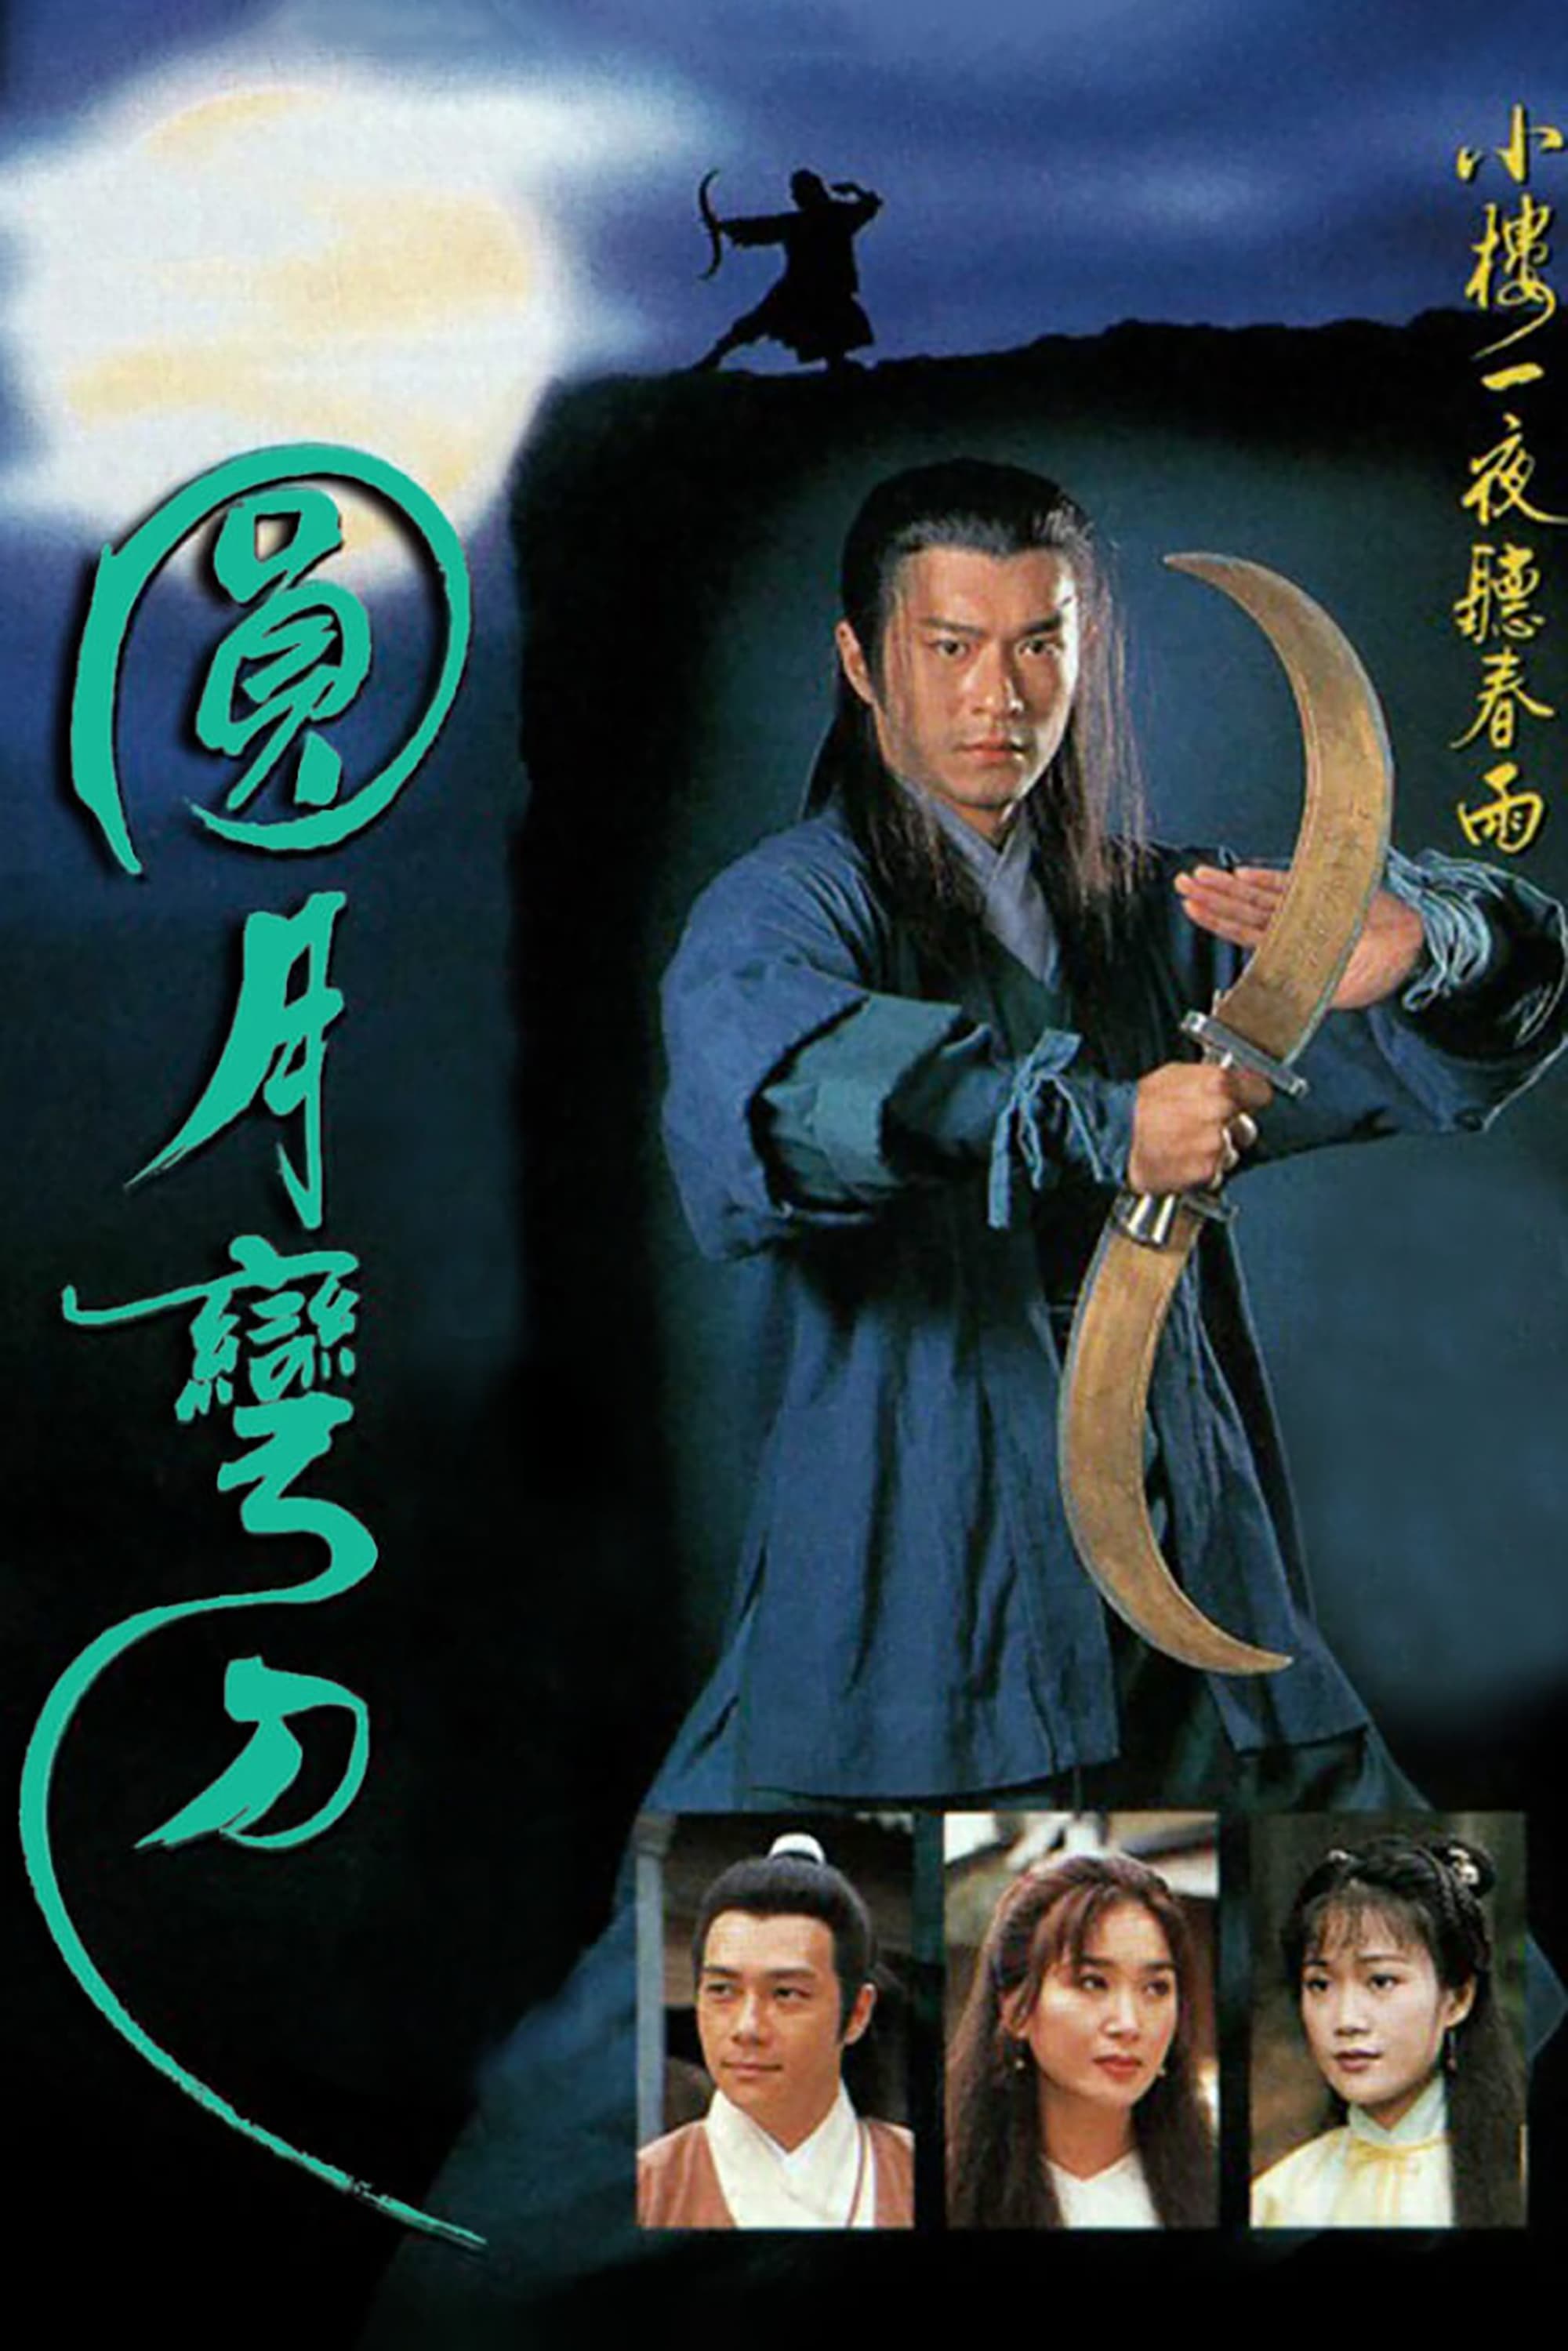 Against the Blade of Honour (1997)